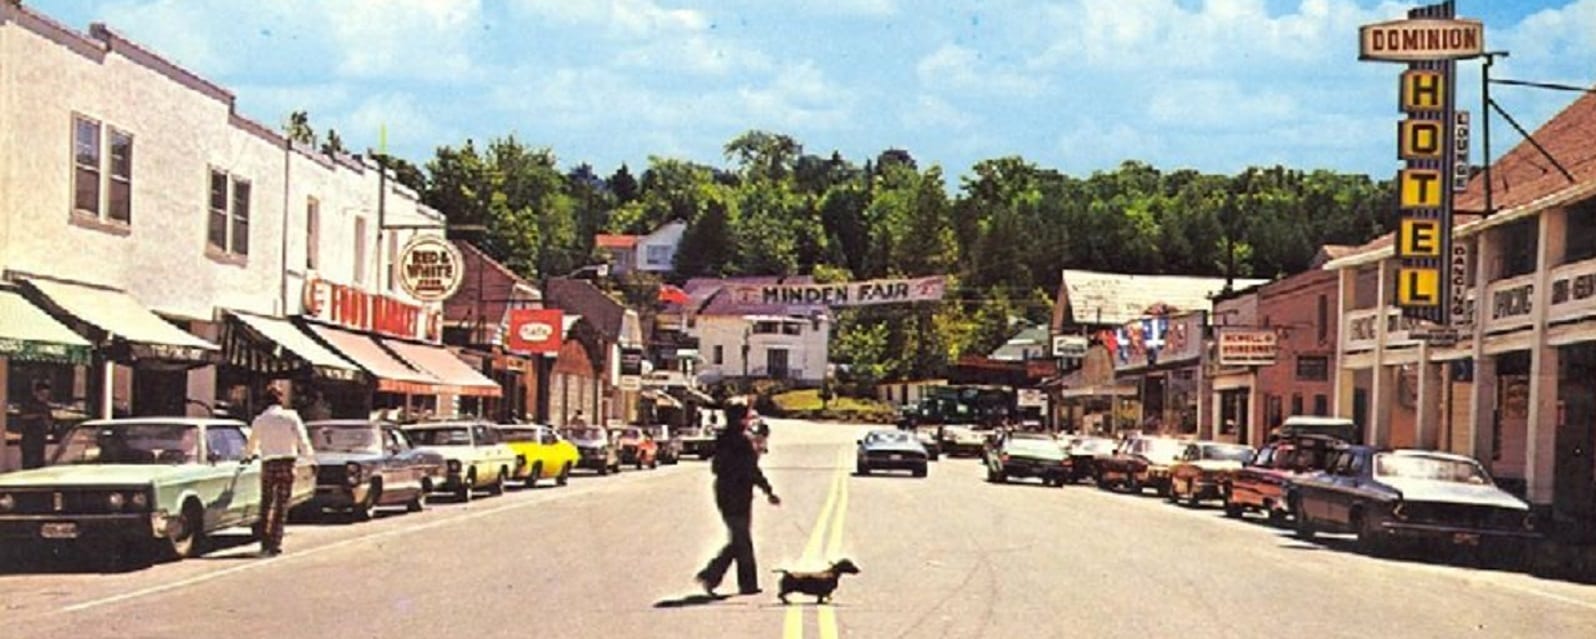 Picture of street of Minden